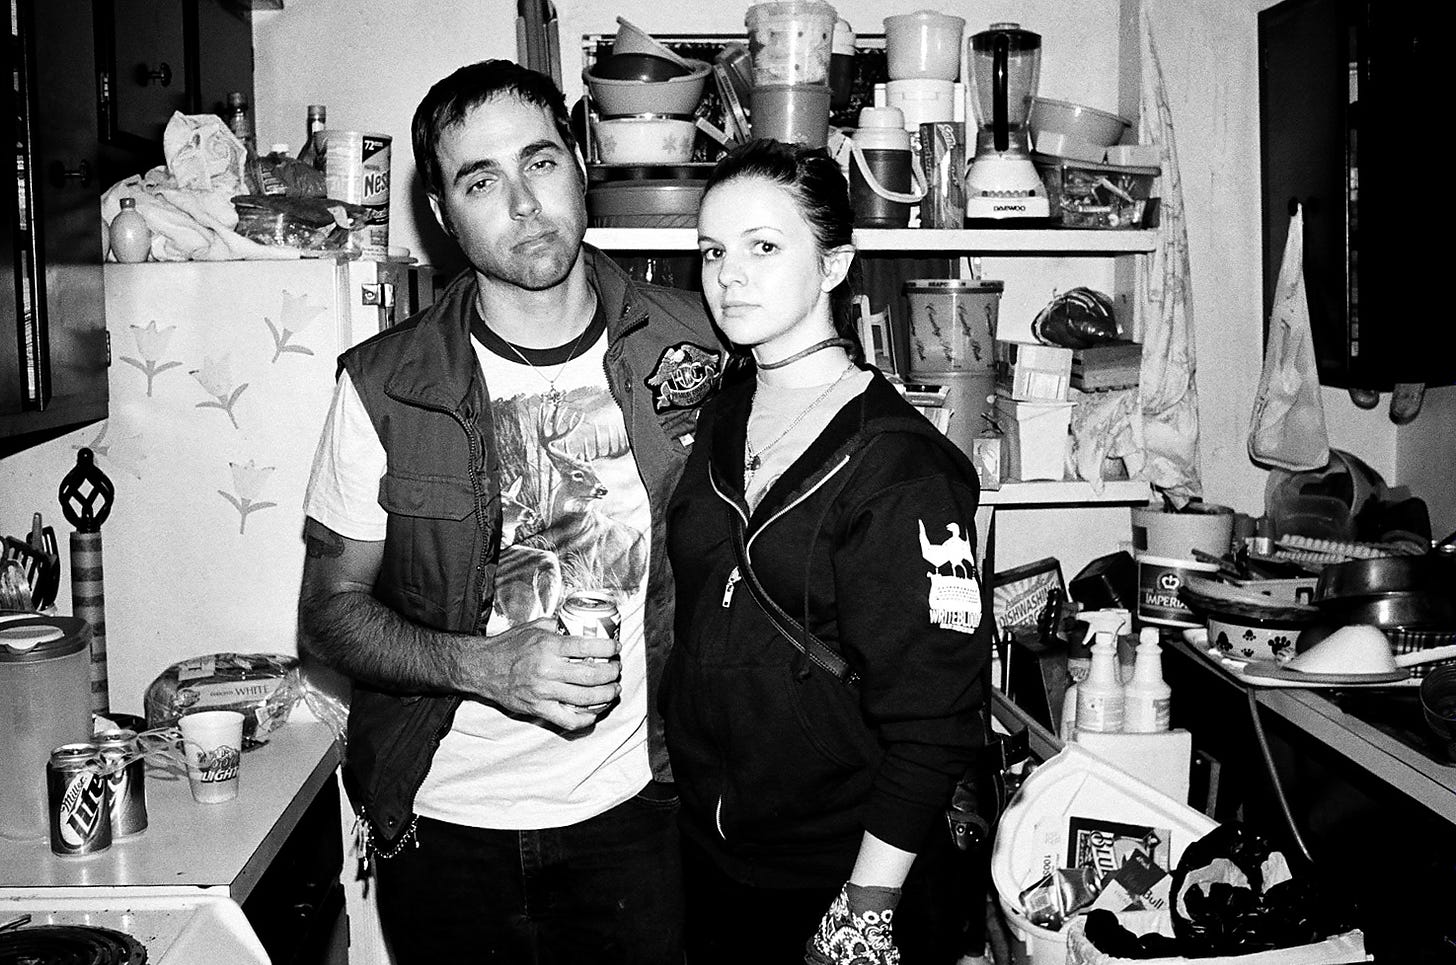 Derrick and Amber stand together in a small, cluttered kitchen. The look to camera, unsmiling. Derrick is holding a beer. Amber appears to be wearing a choker necklace. 